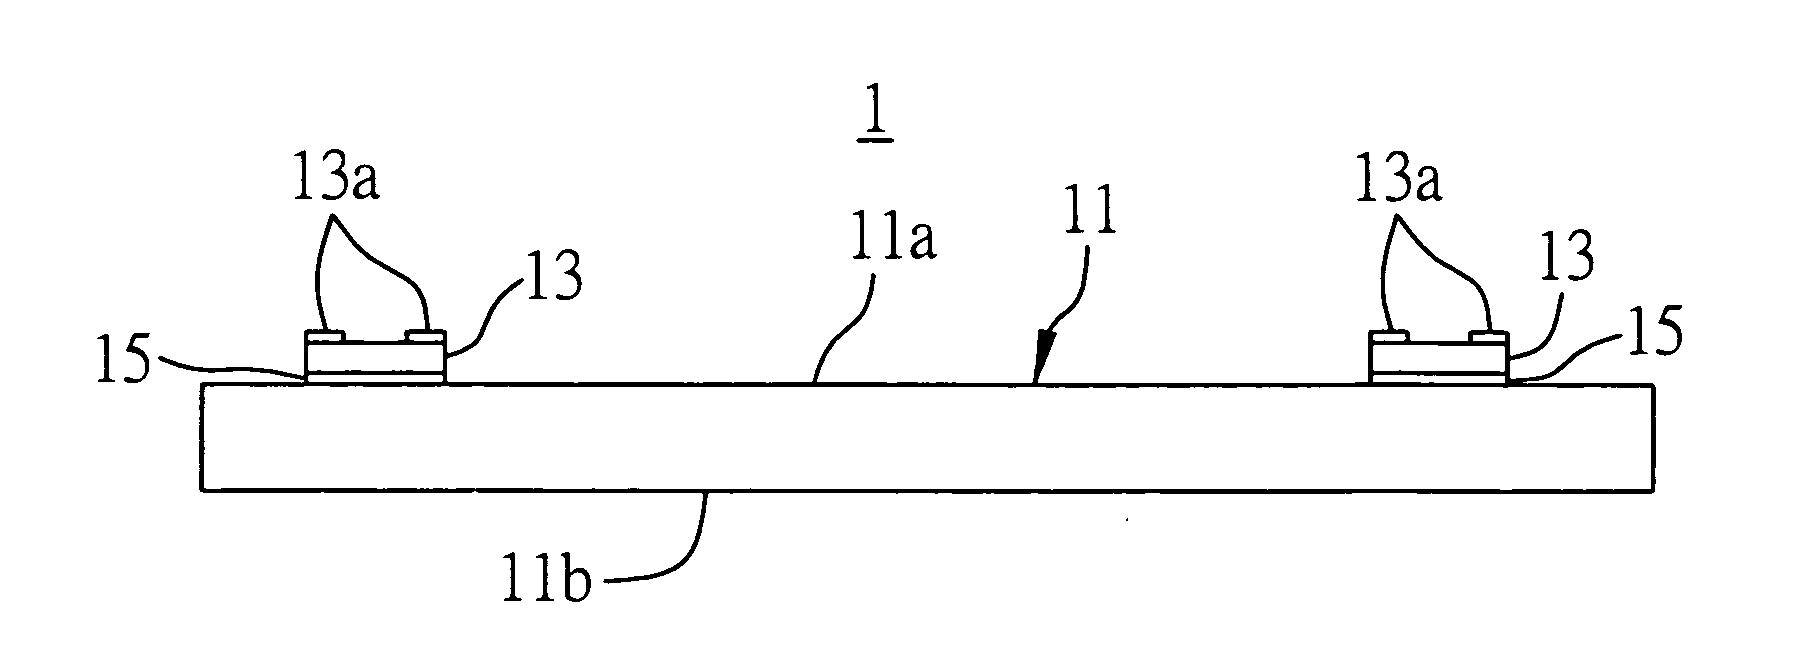 Substrate structure integrated with passive components